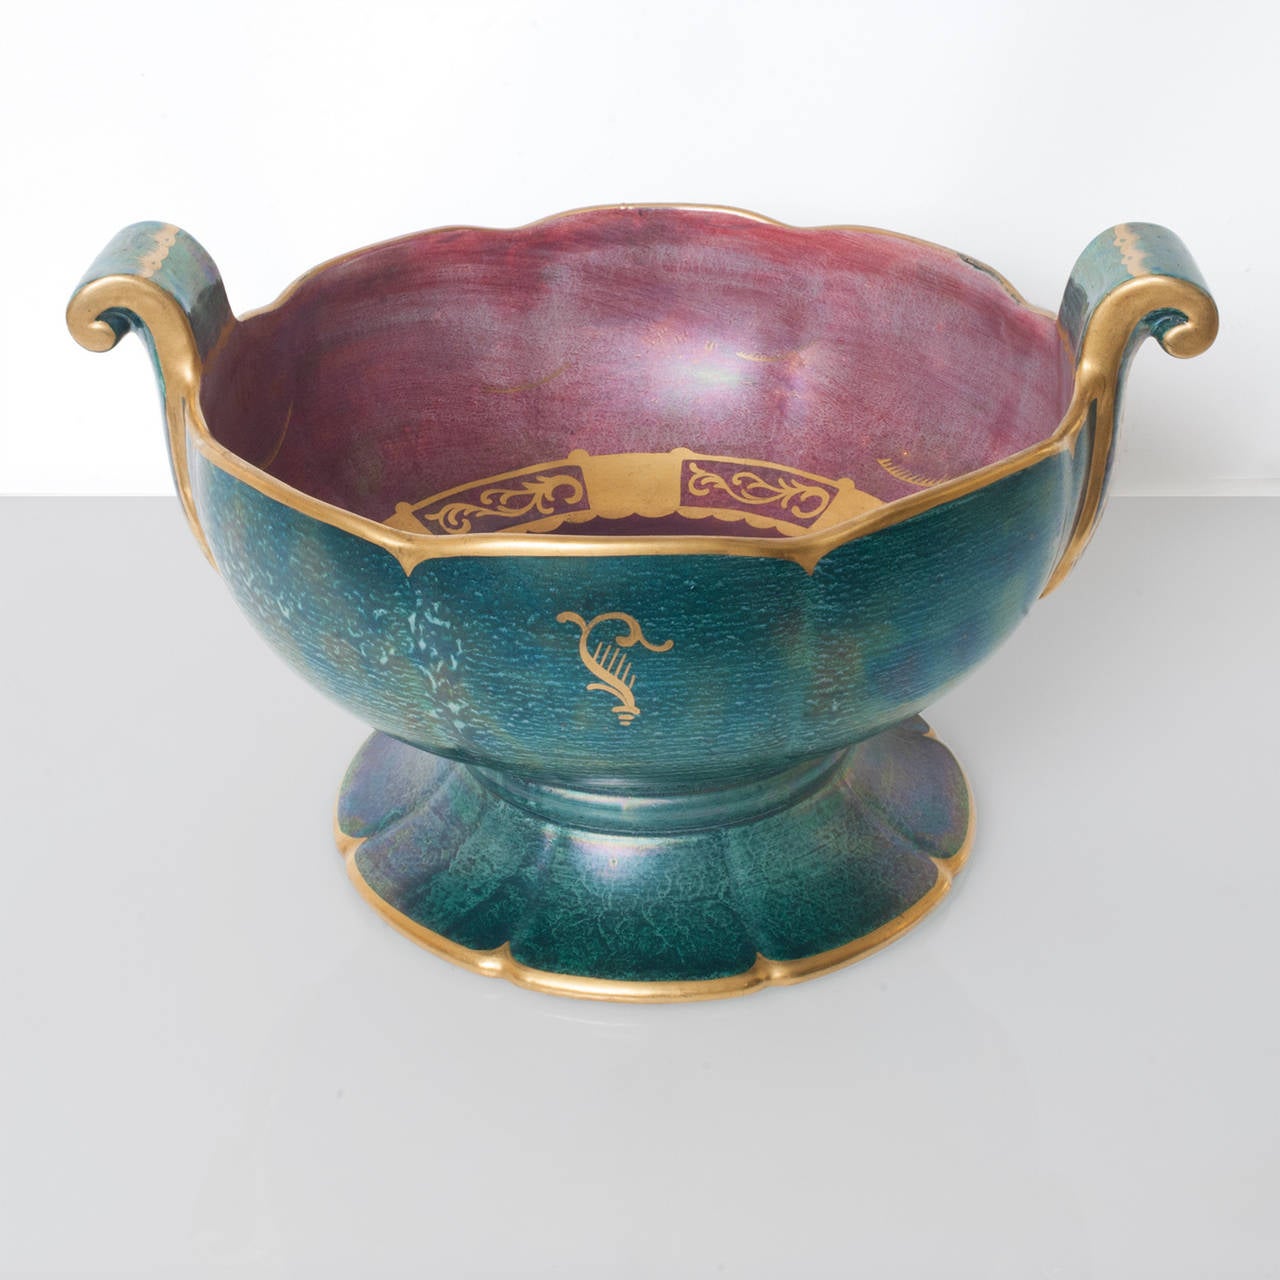 A large Scandinavian Modern luster glazed ceramic bowl with hand decorations in gold. Bowl has 2 handles with are detailed with acanthus leaves and is signed and dated 1928.
Diameter 14", height: 8.25".